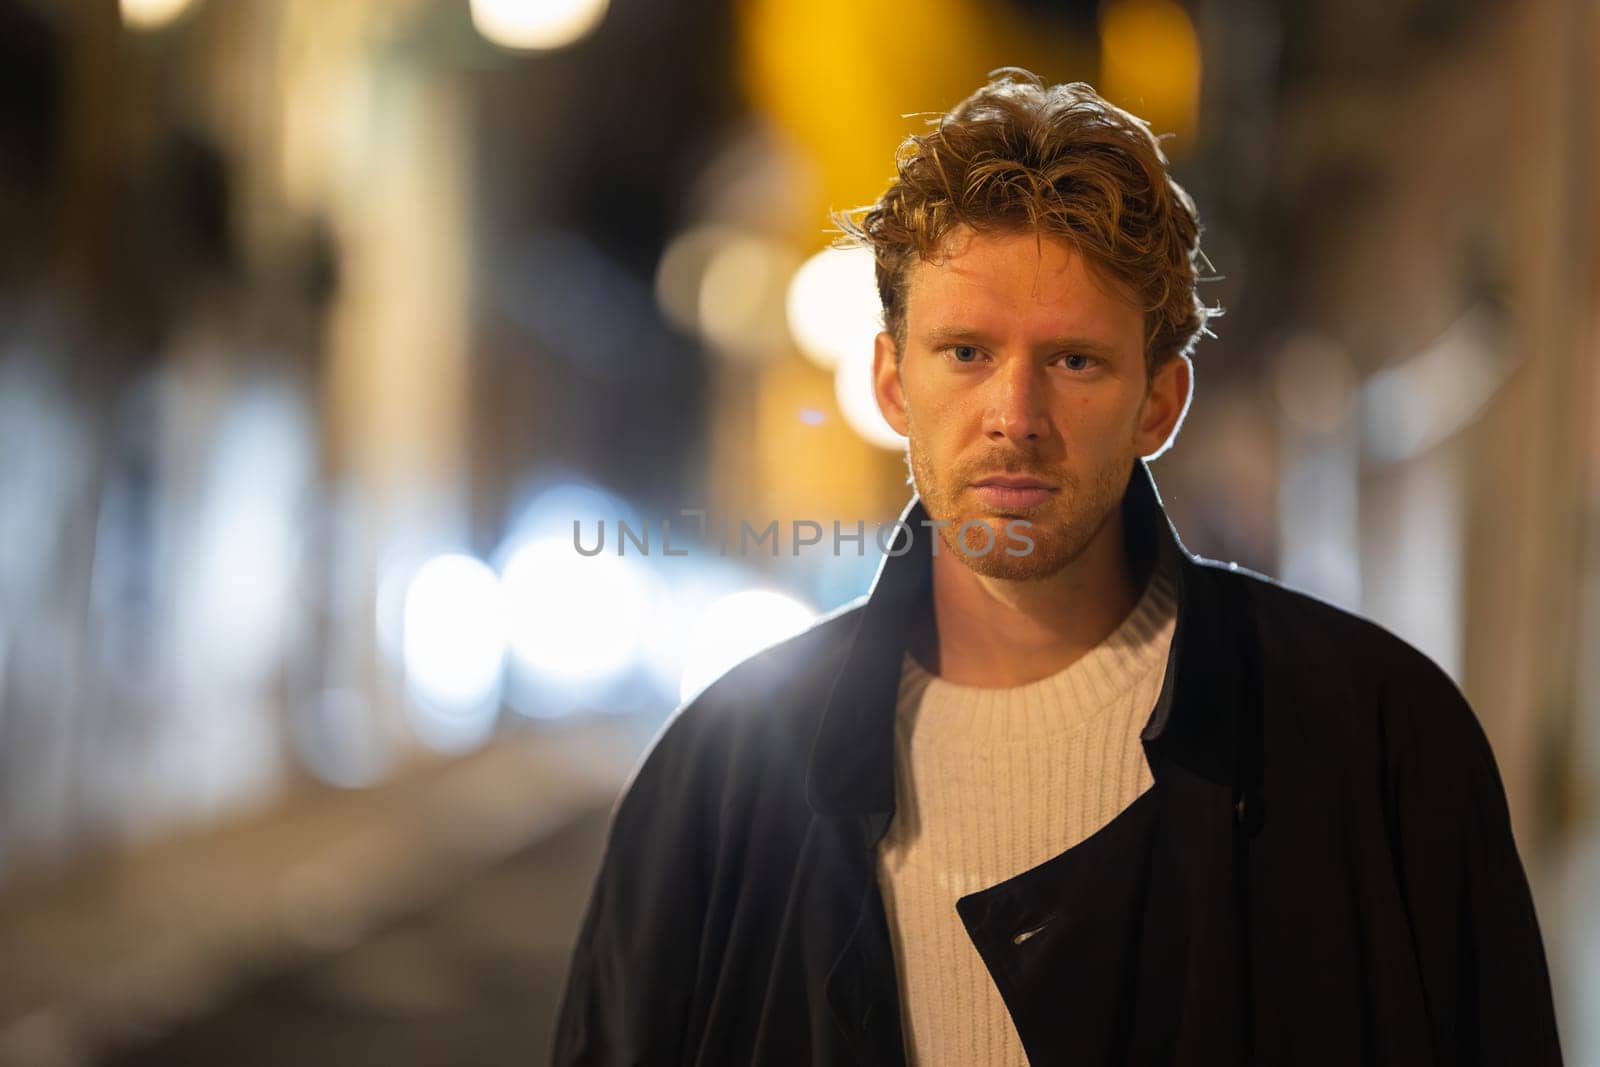 A man with red hair is walking down a street at night. He is wearing a black coat and a white shirt